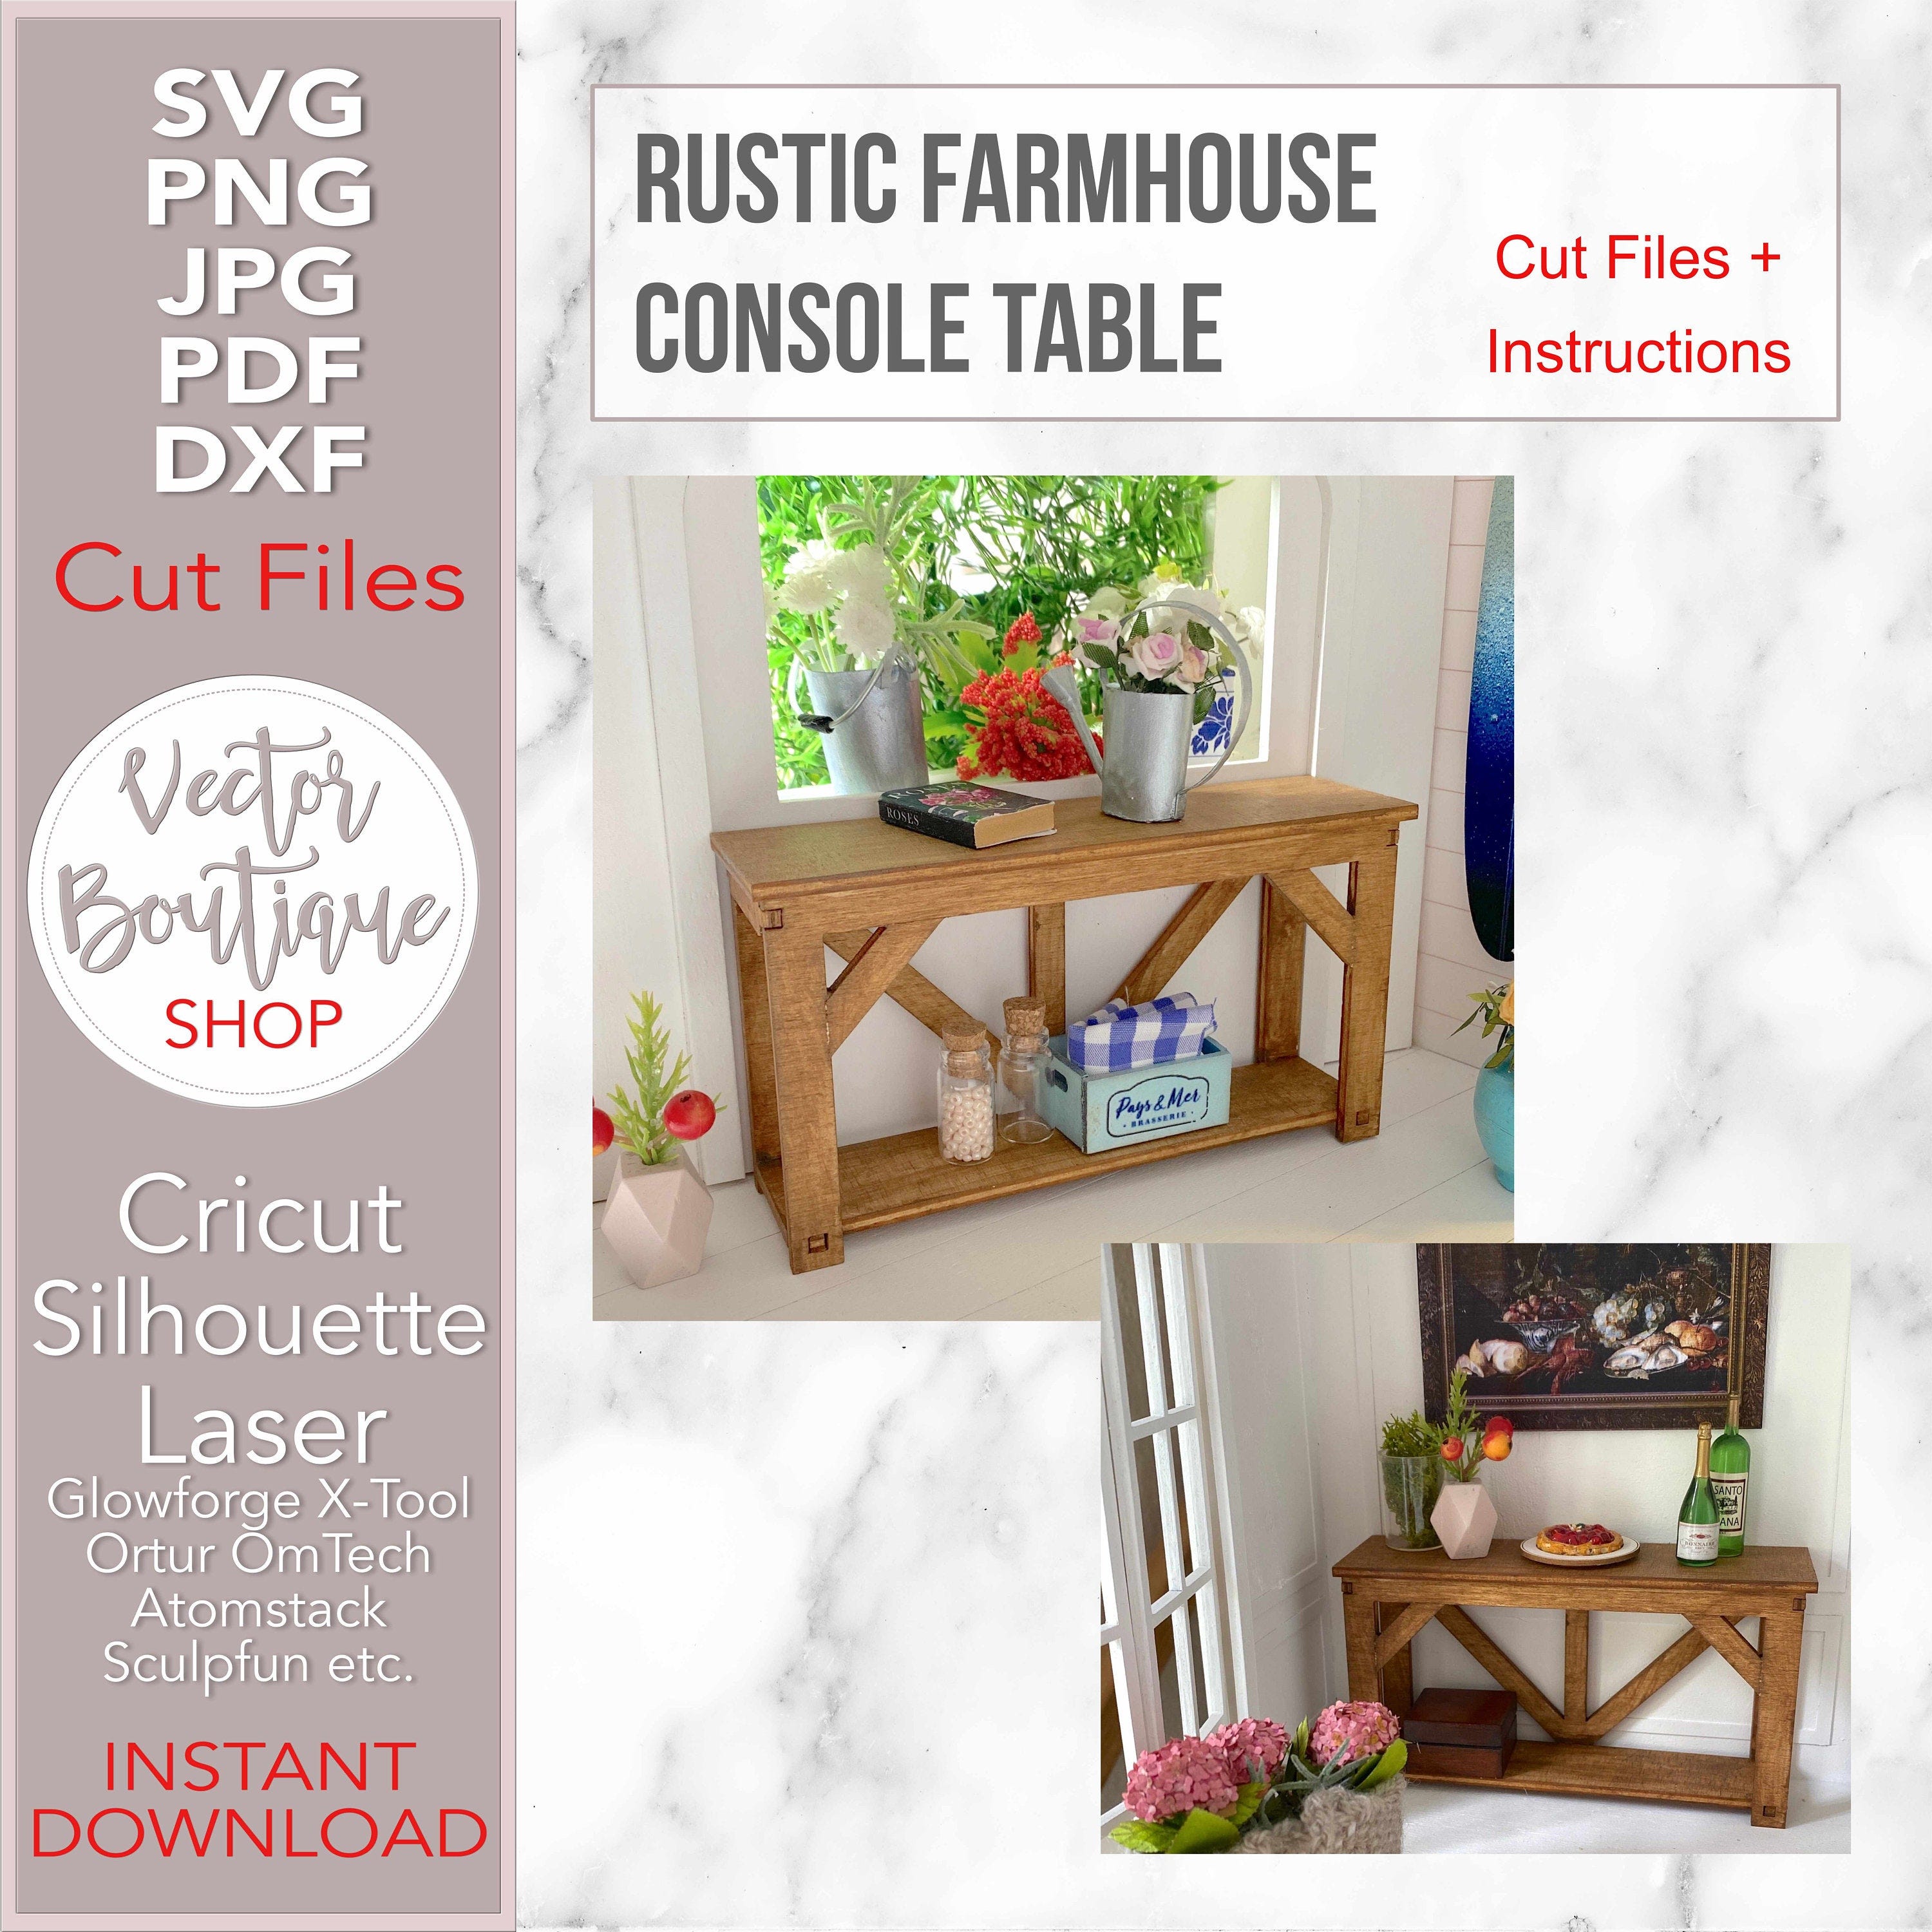 Farmhouse Console Table SVG Cut Files + instructions PDF - For Cricut, Silhouette, Laser - For any dollhouse roombox size